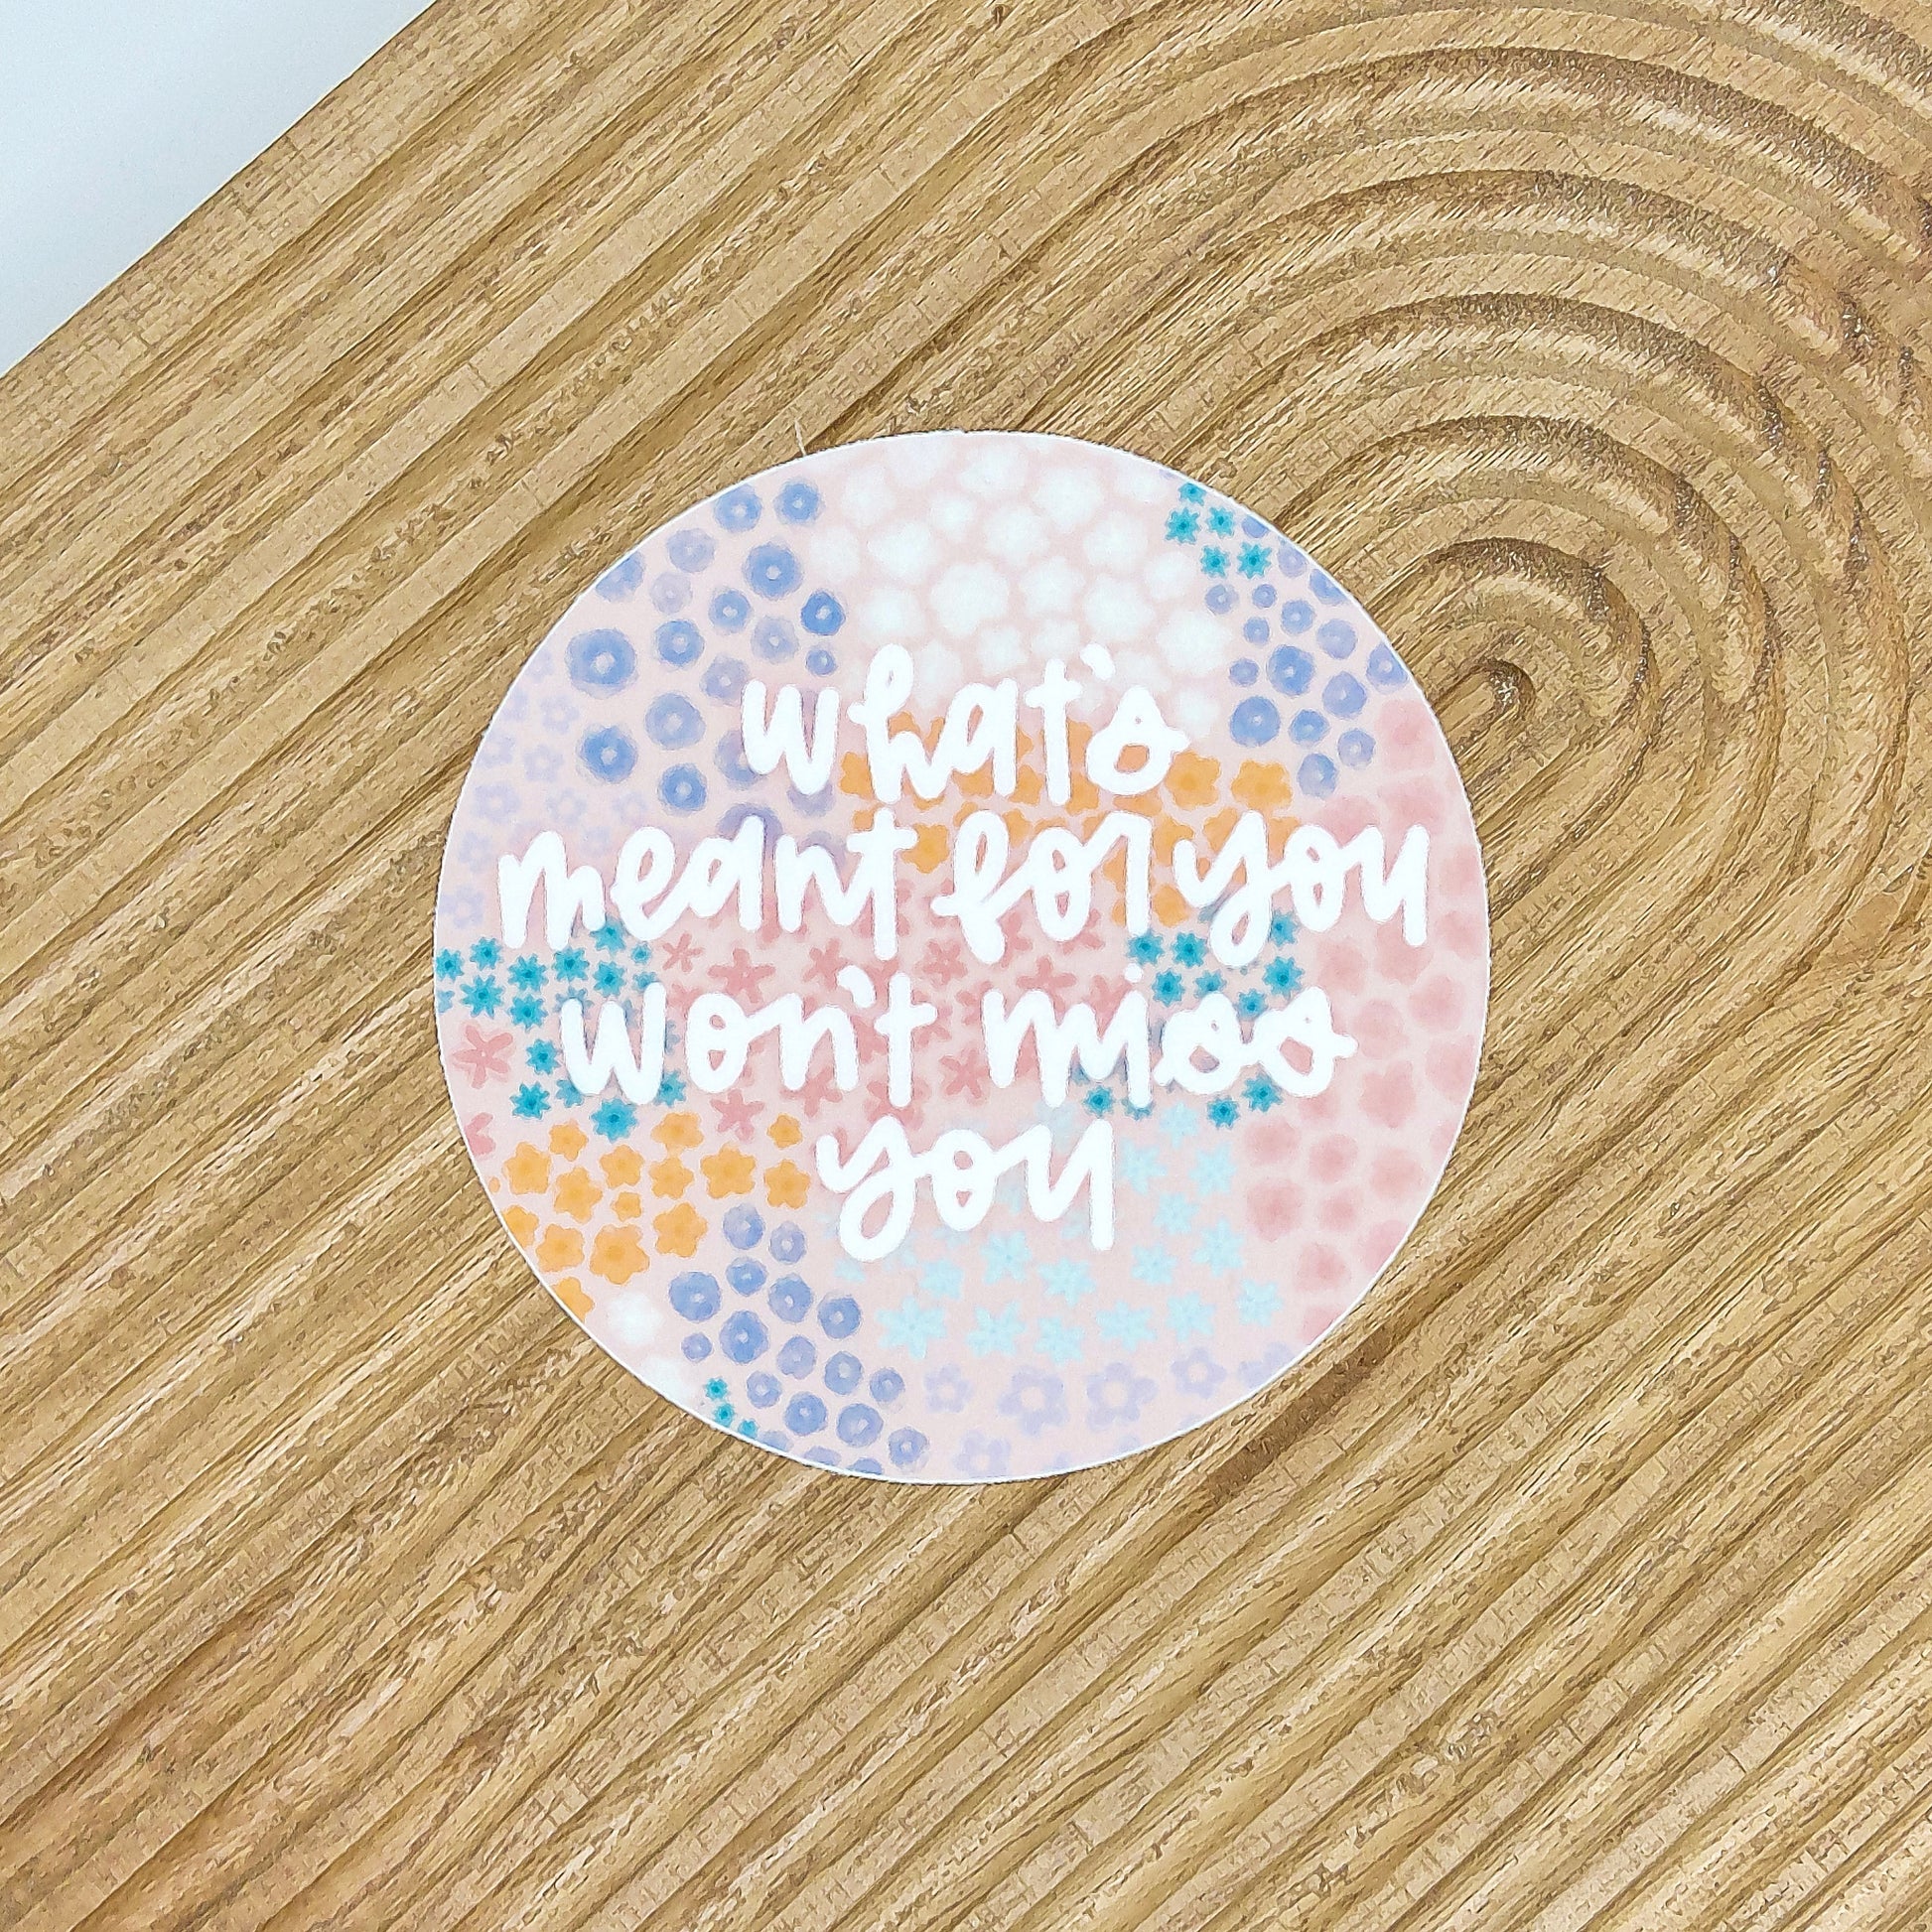 What’s meant for you won’t miss you sticker. Weatherproof Vinyl Sticker. Aesthetic Positive Sticker for Car, Laptop, Water bottle.